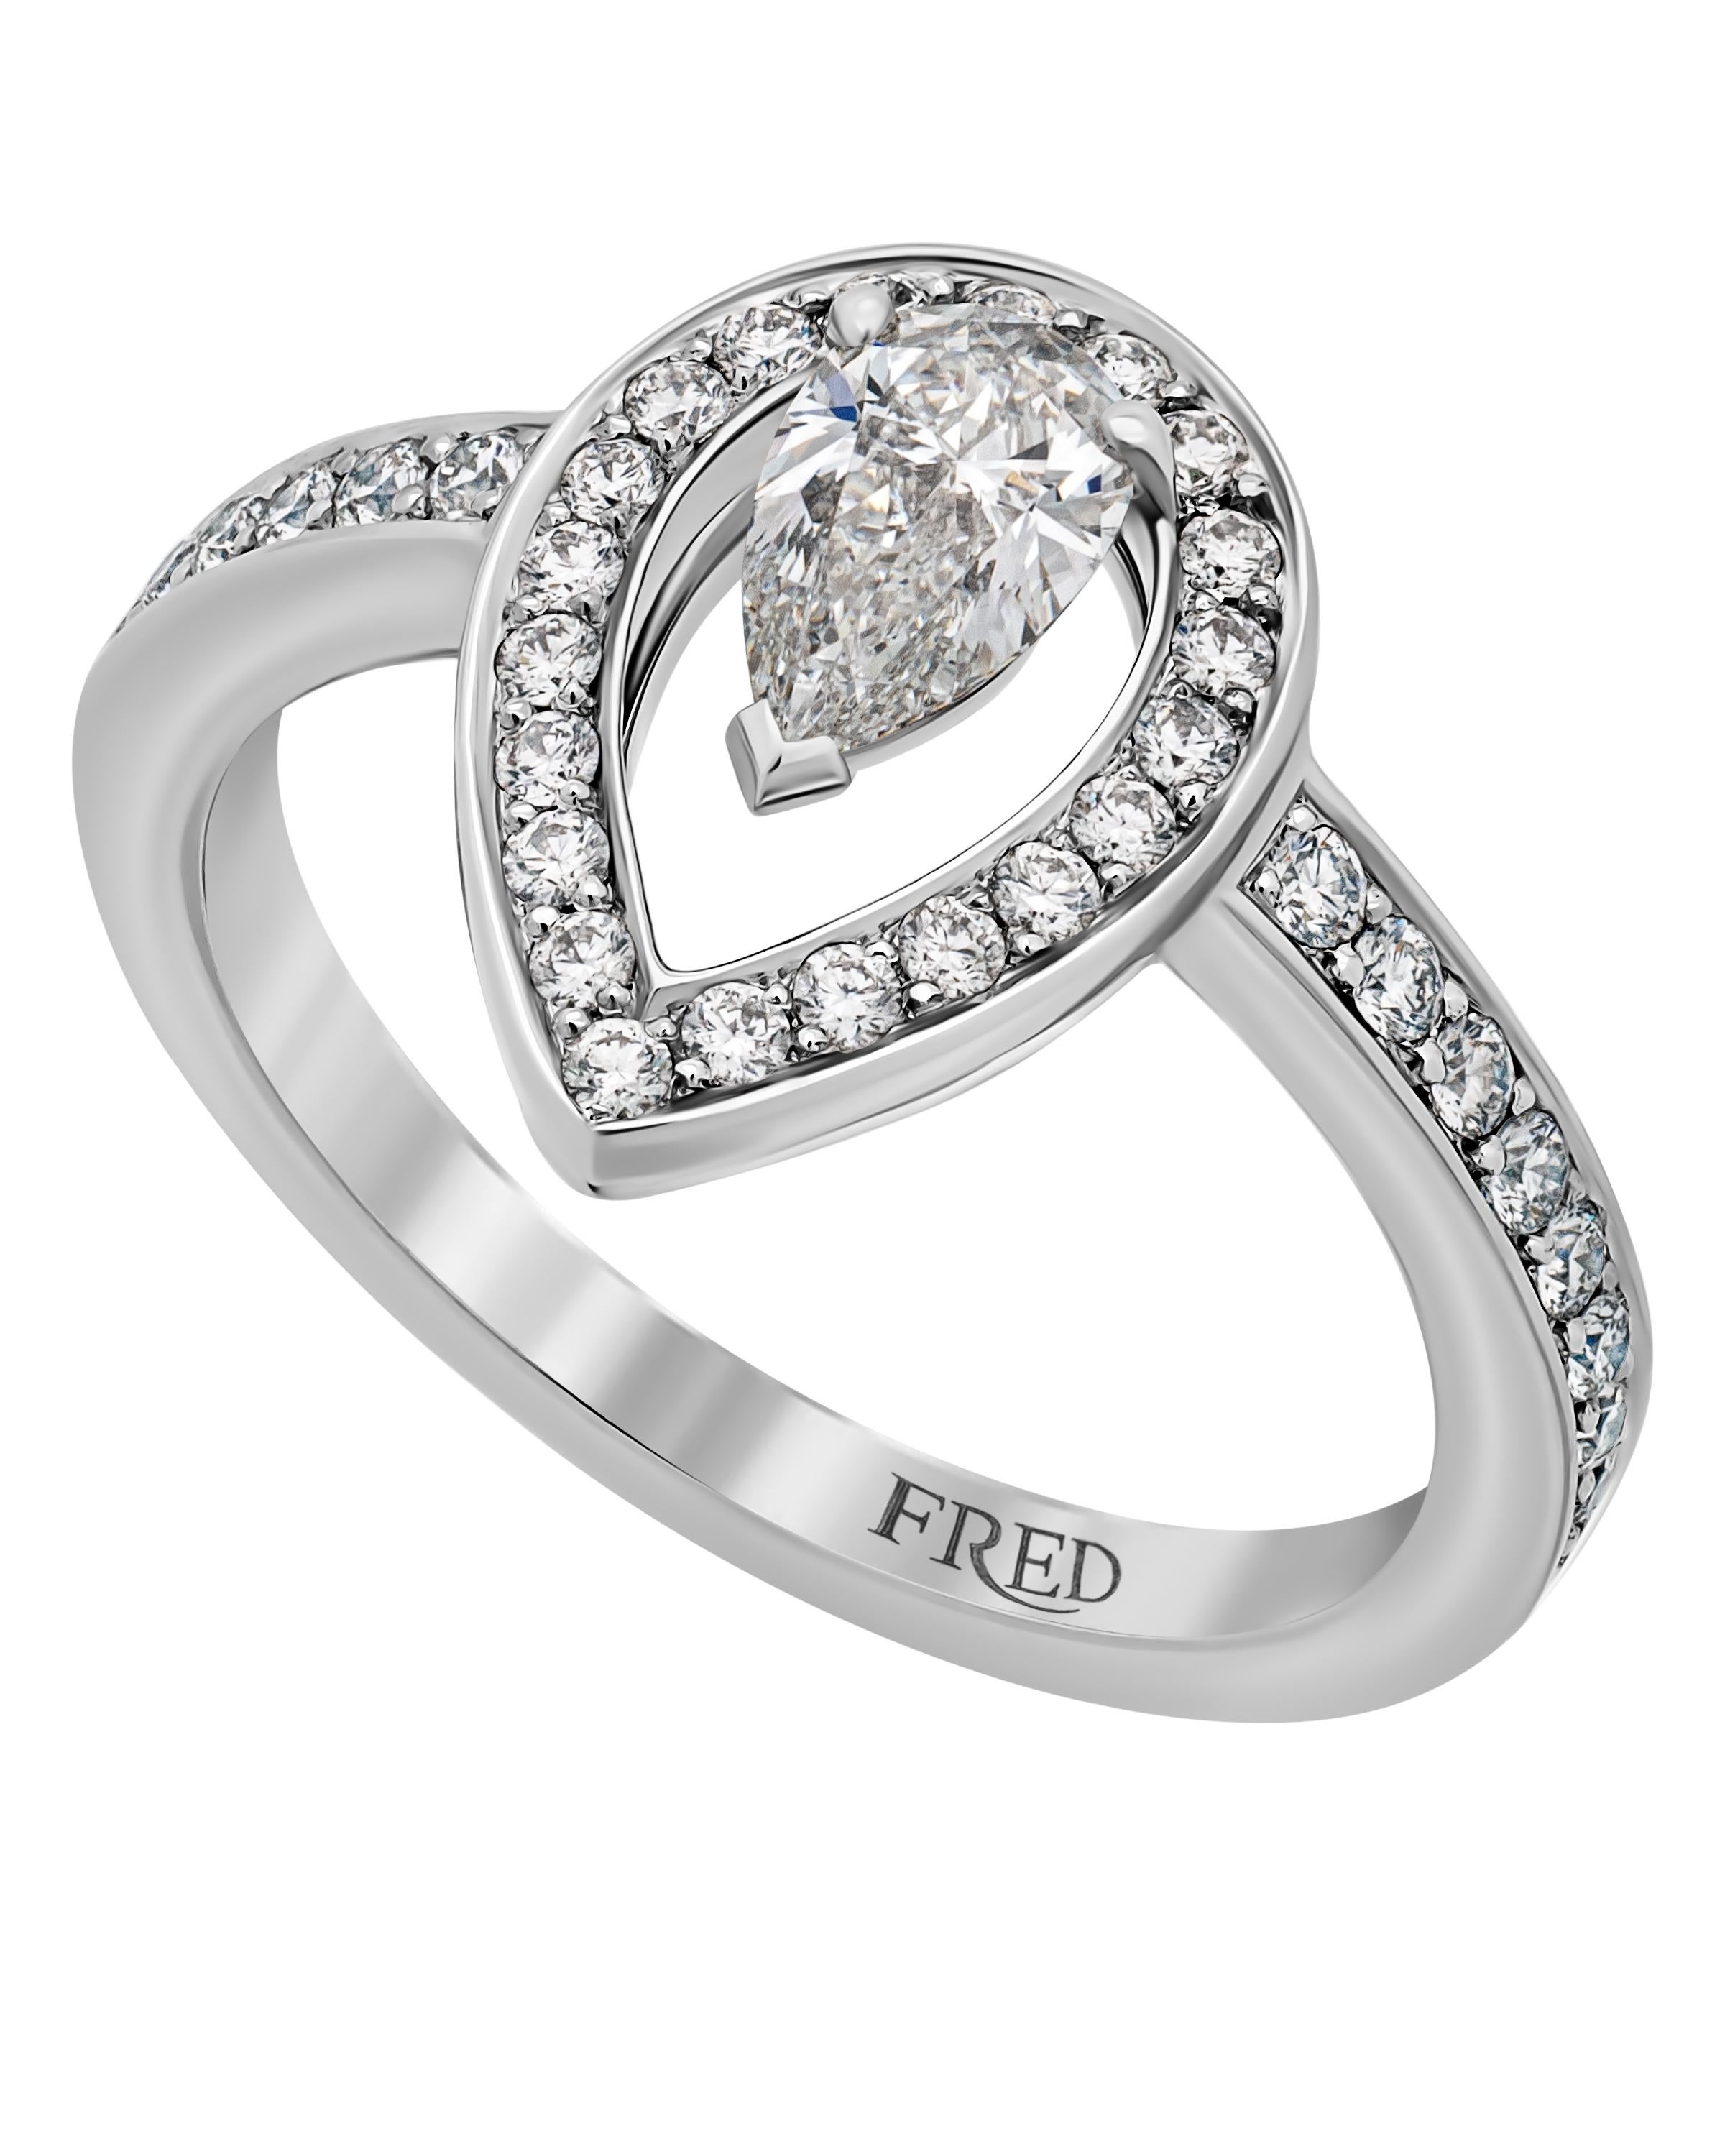 This beautiful FRED Platinum Ring features center diamond 0.32ct. E-VVS2 0.67ct. tw. diamonds set in platinum. The ring size is 3.75 (46.1). The Band Width is 0.48